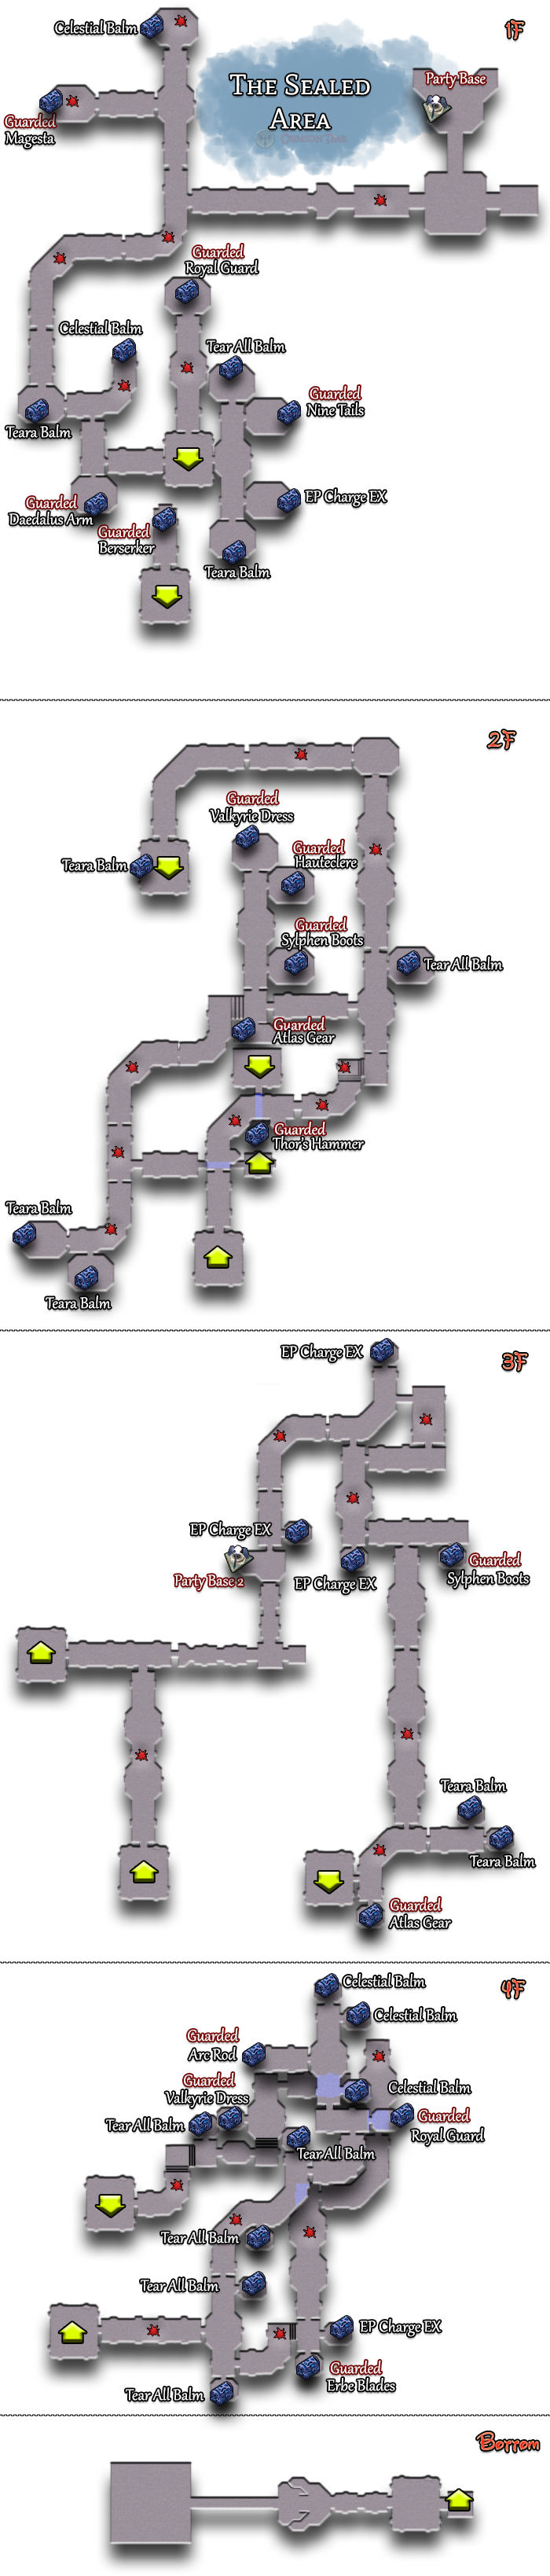 Sealed Area Map